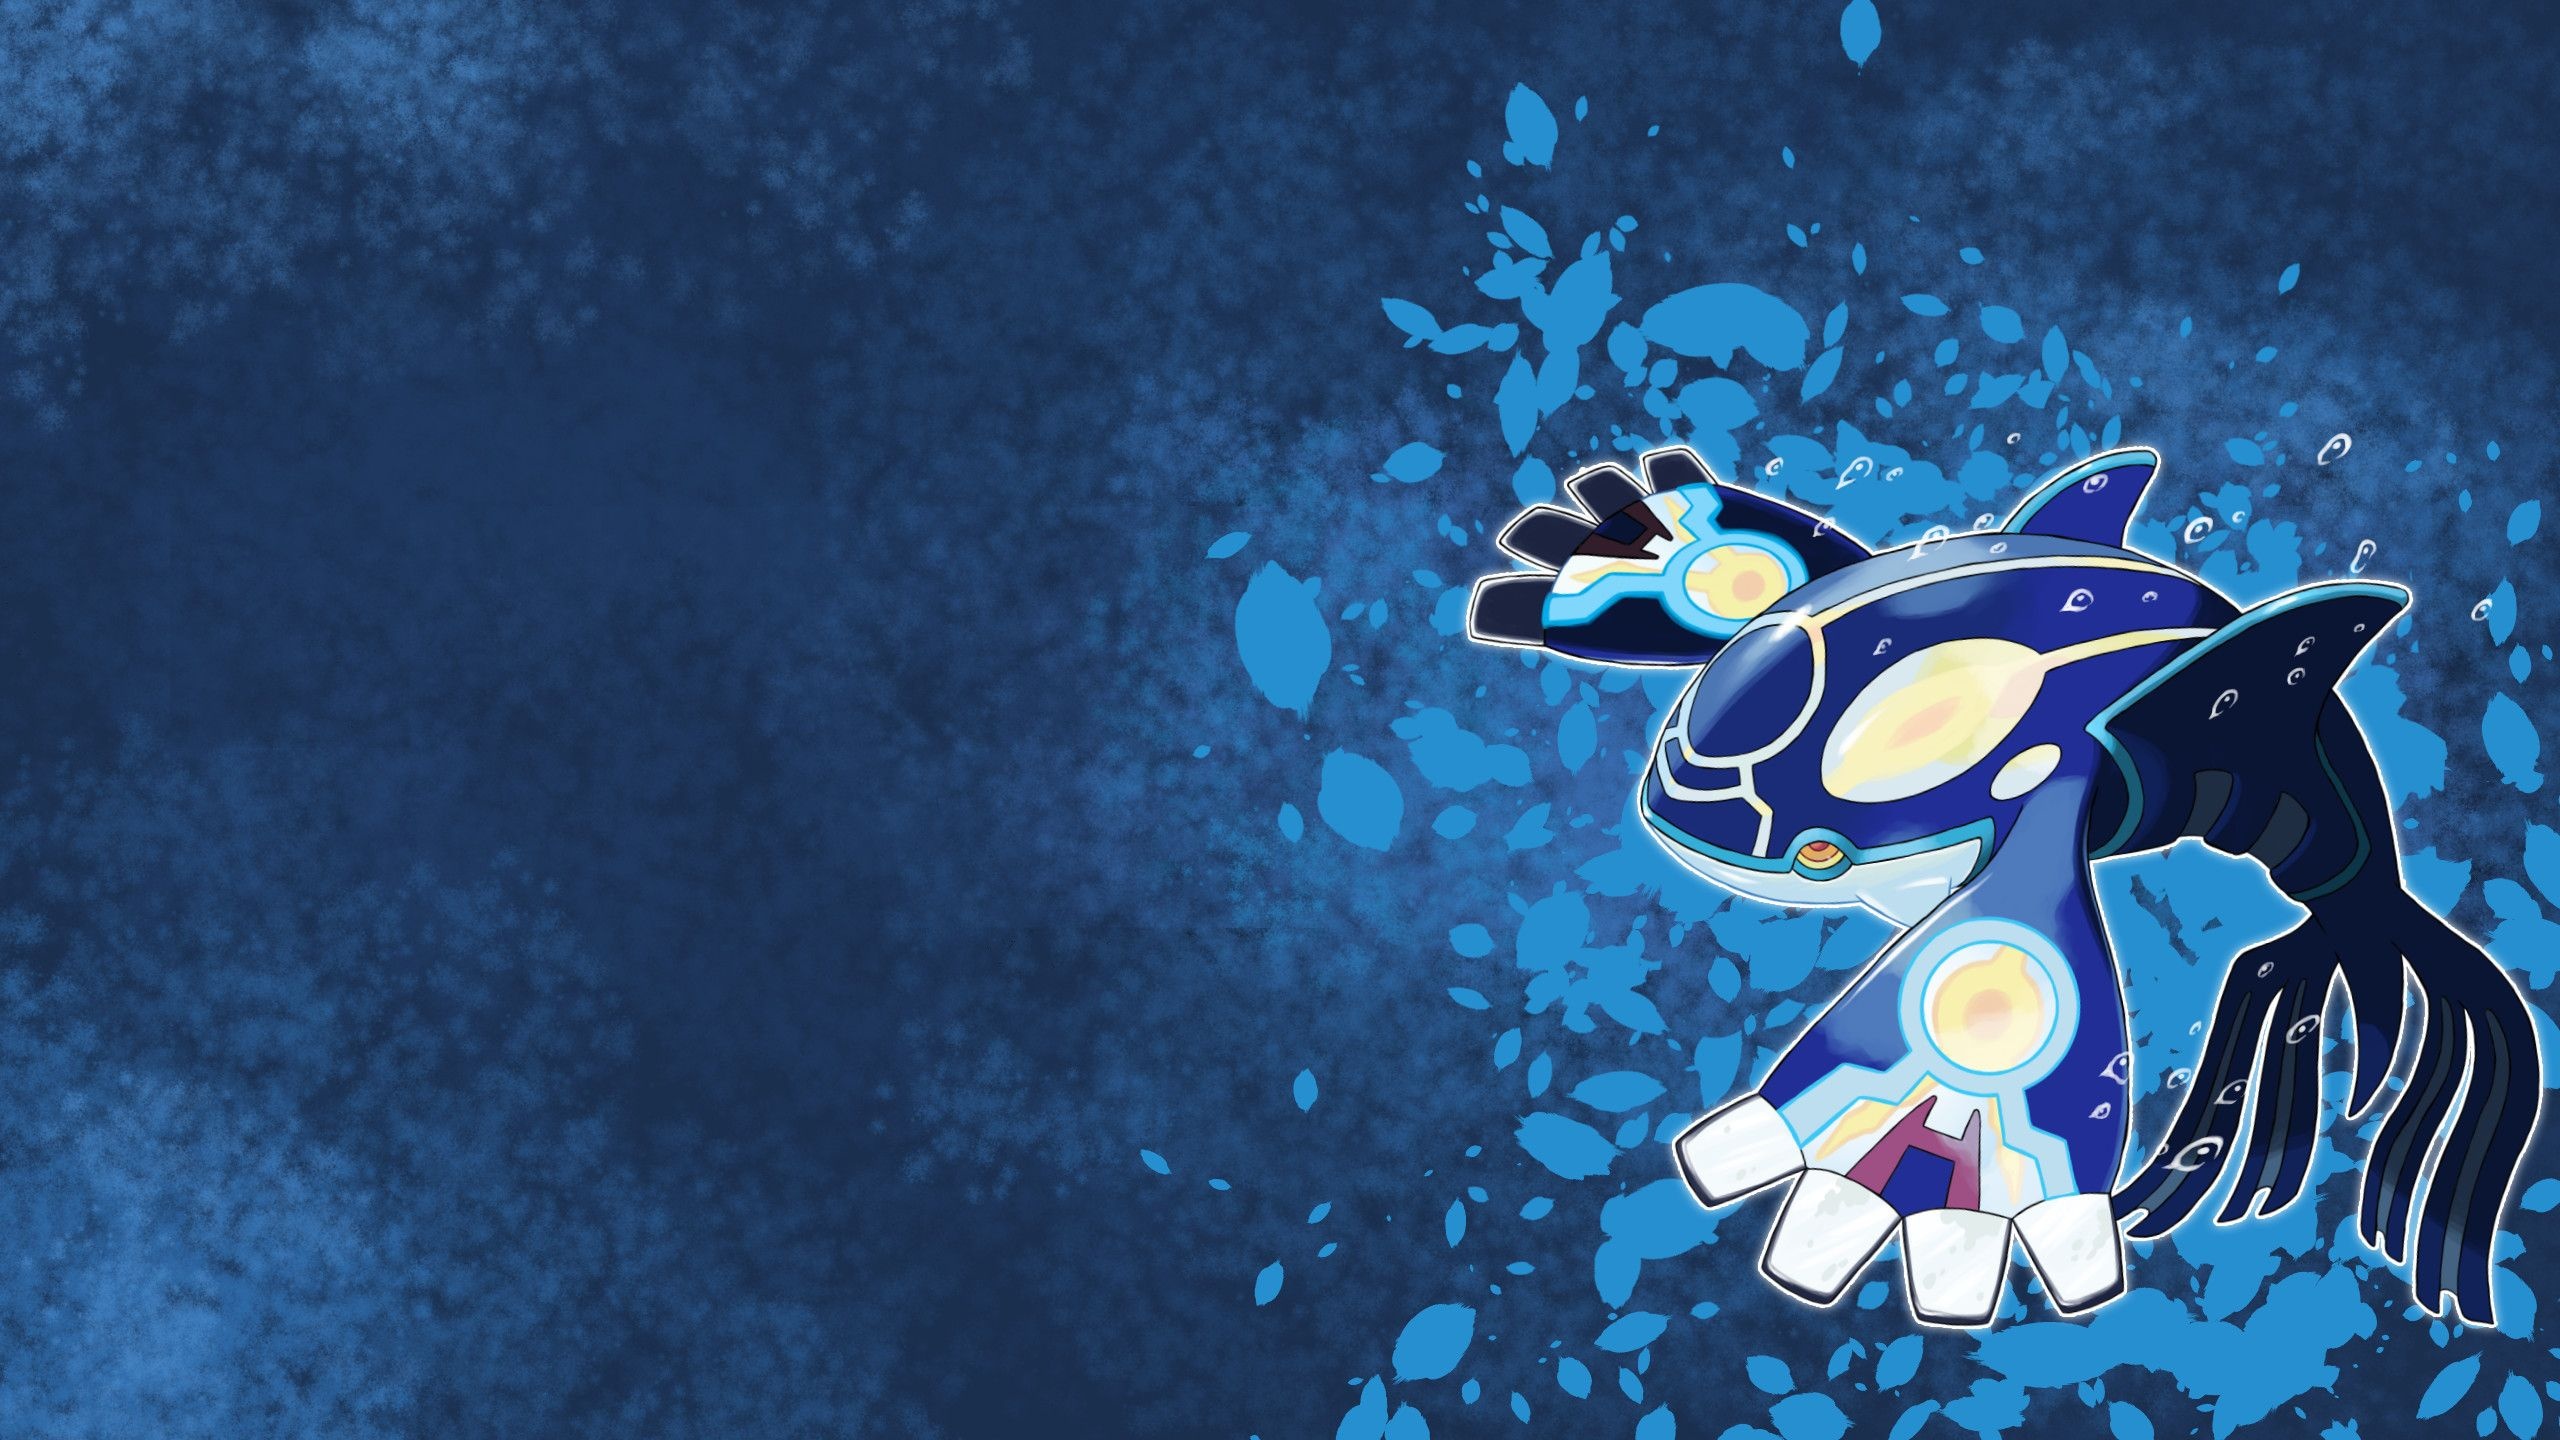 Kyogre (Anime), Wallpapers, Top free, Backgrounds, 2560x1440 HD Desktop